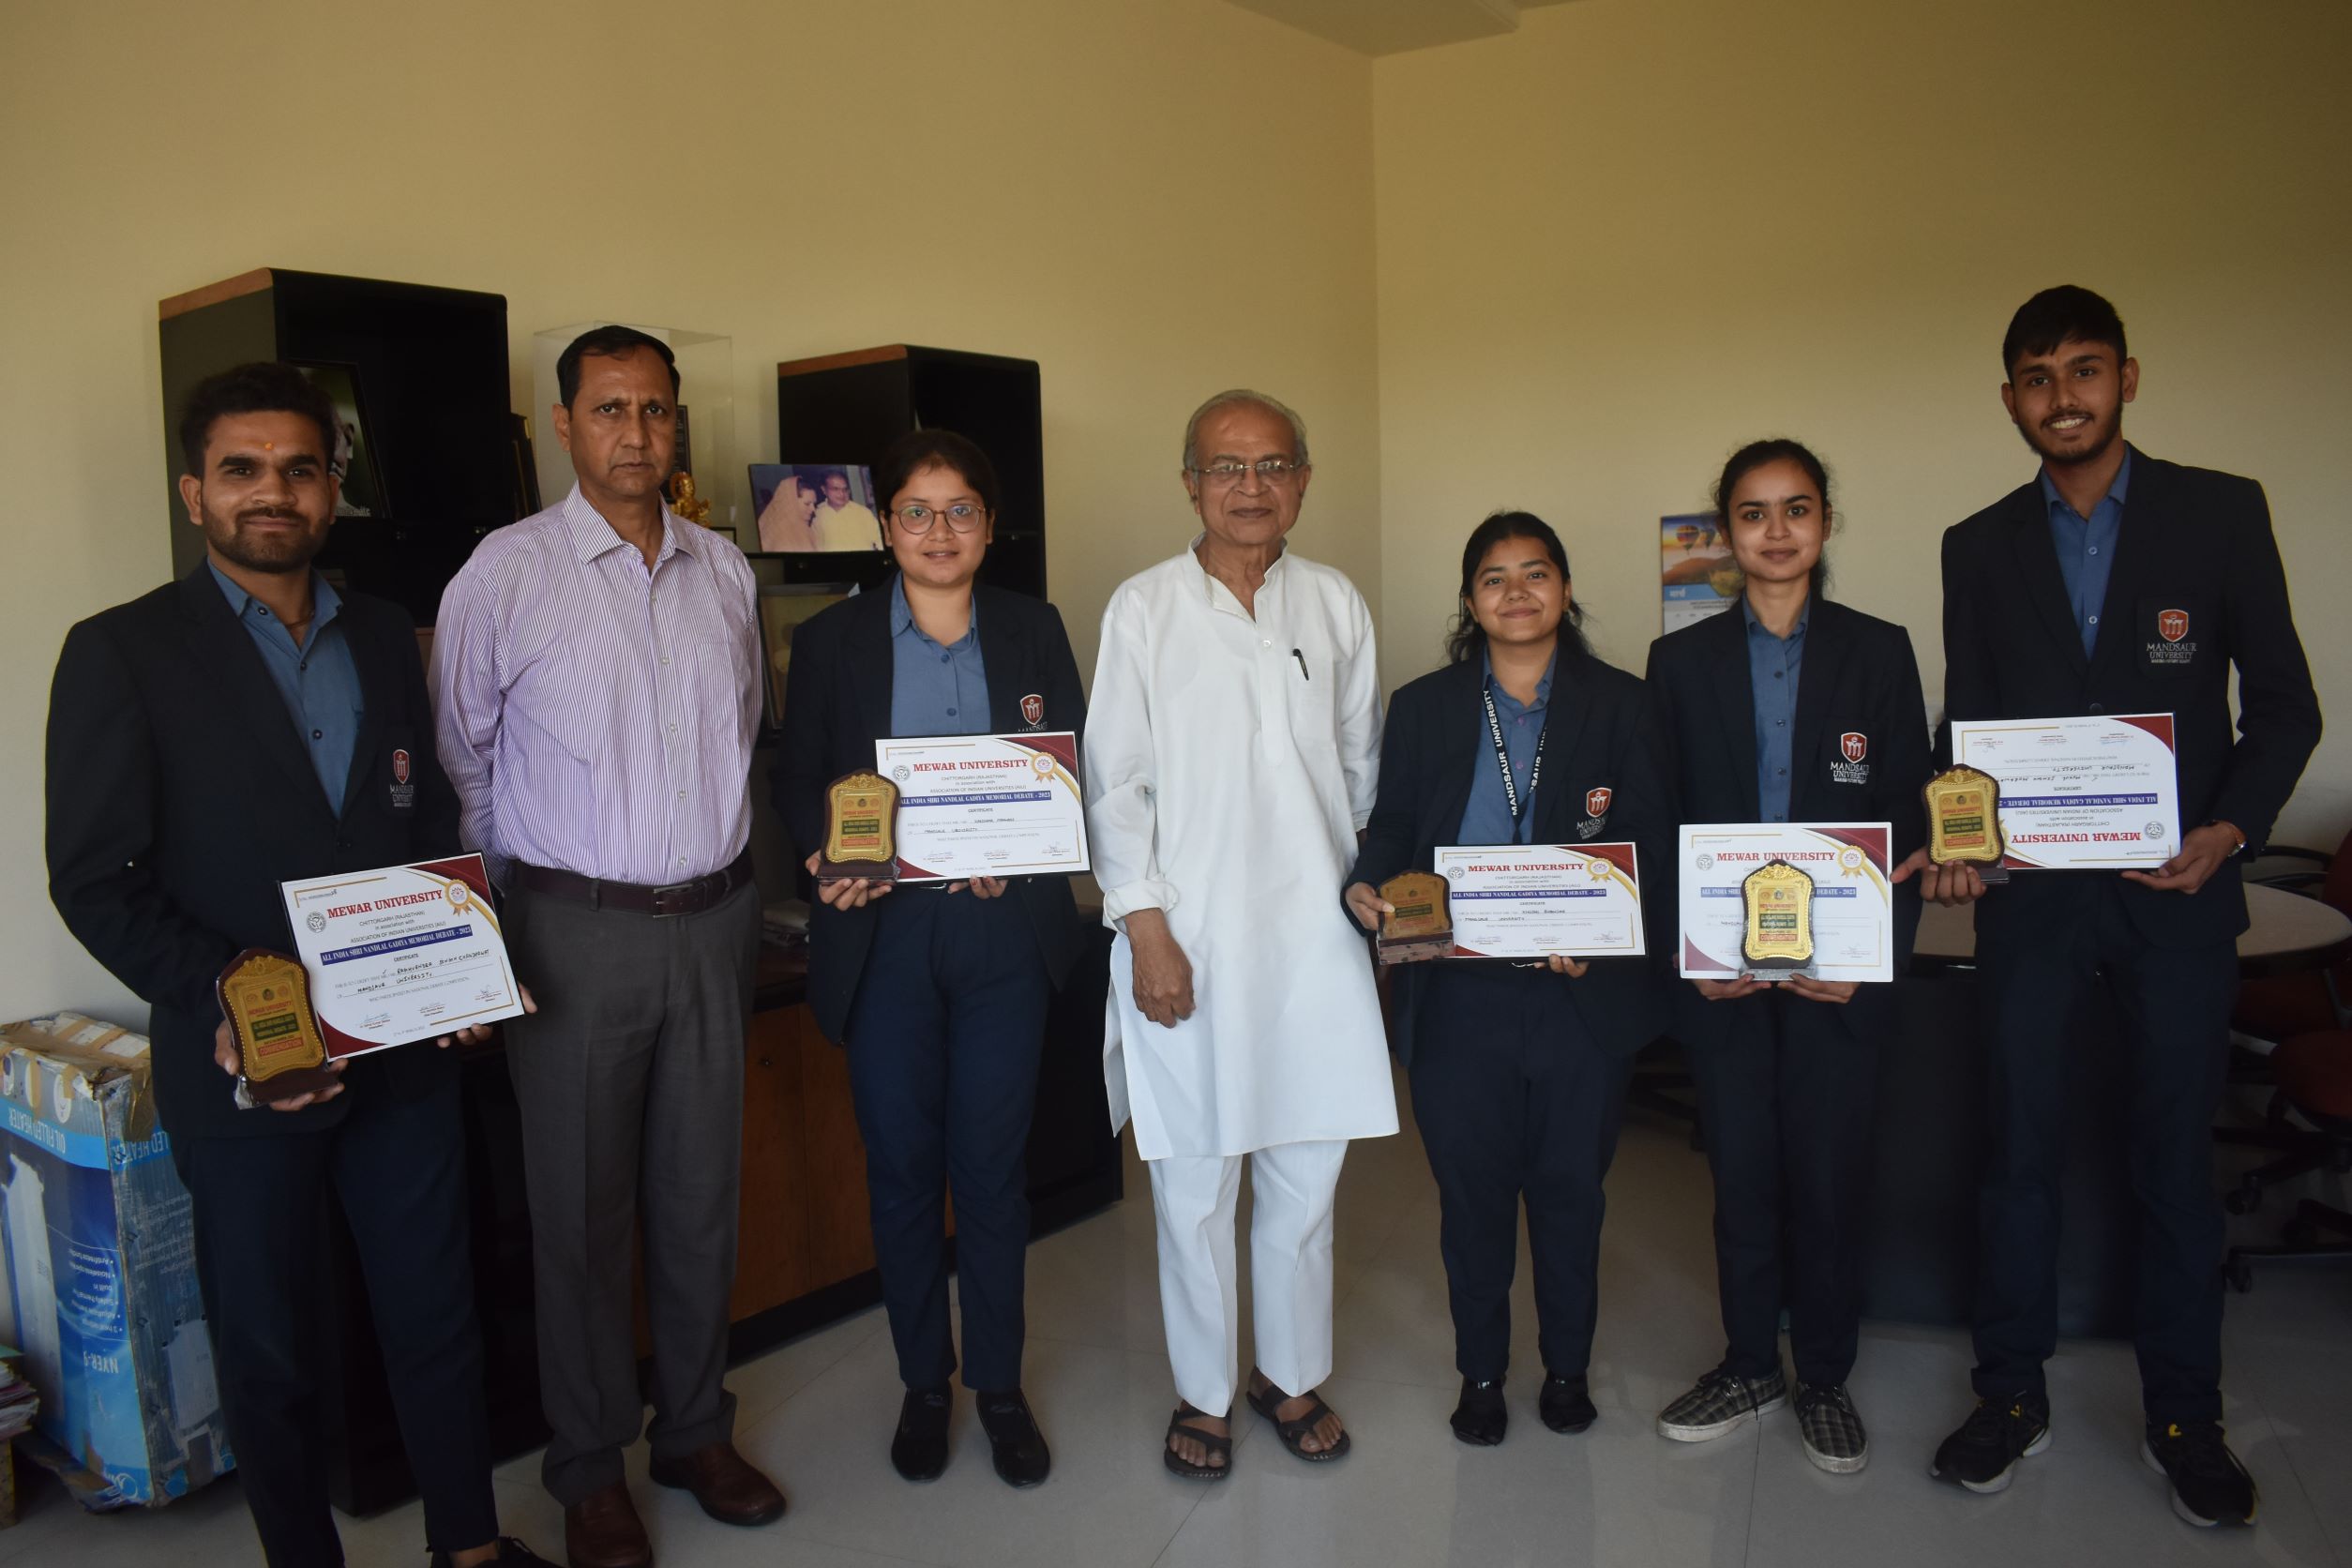 Mandsaur University students participated in All India Level Debate Competition